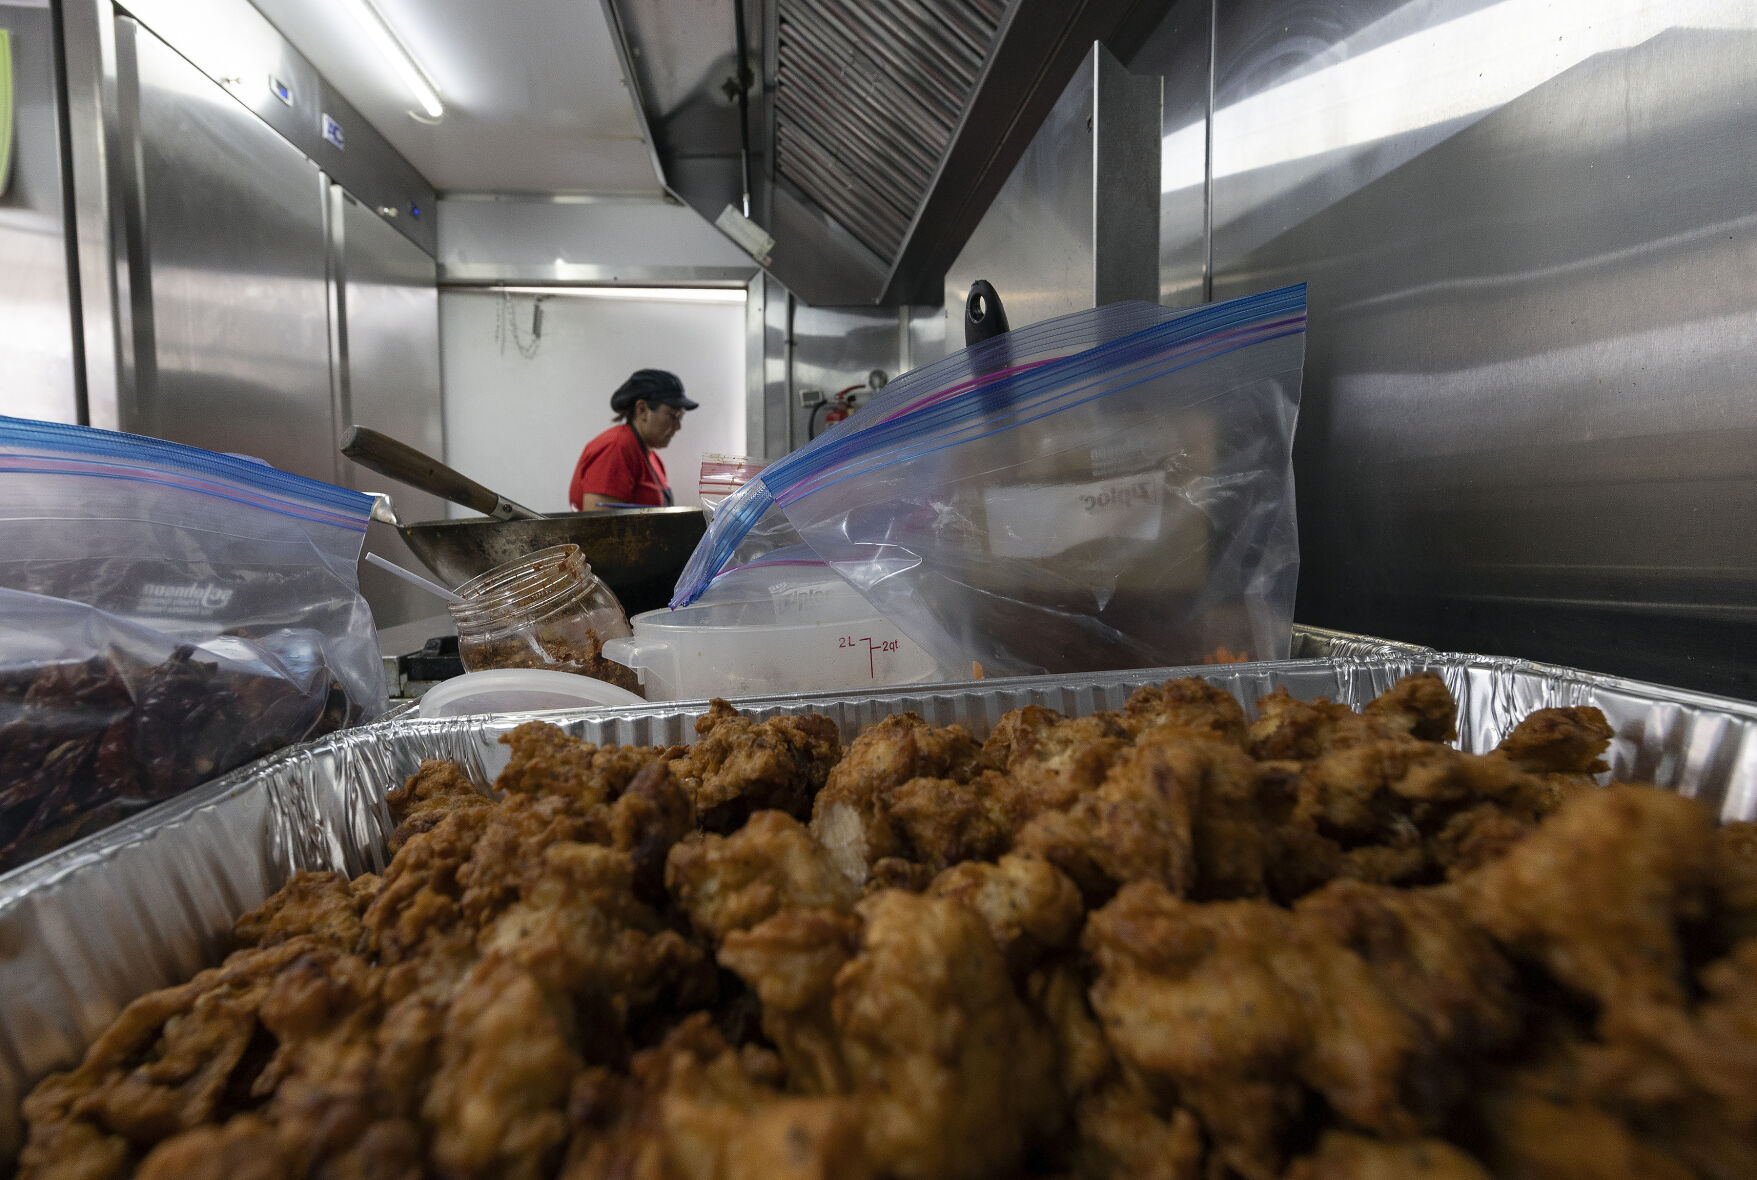 Versus food truck co-owner Liberty Miller prepares an order while parked in a lot in Peosta, Iowa, on Friday, Sept. 22, 2023.    PHOTO CREDIT: File photo